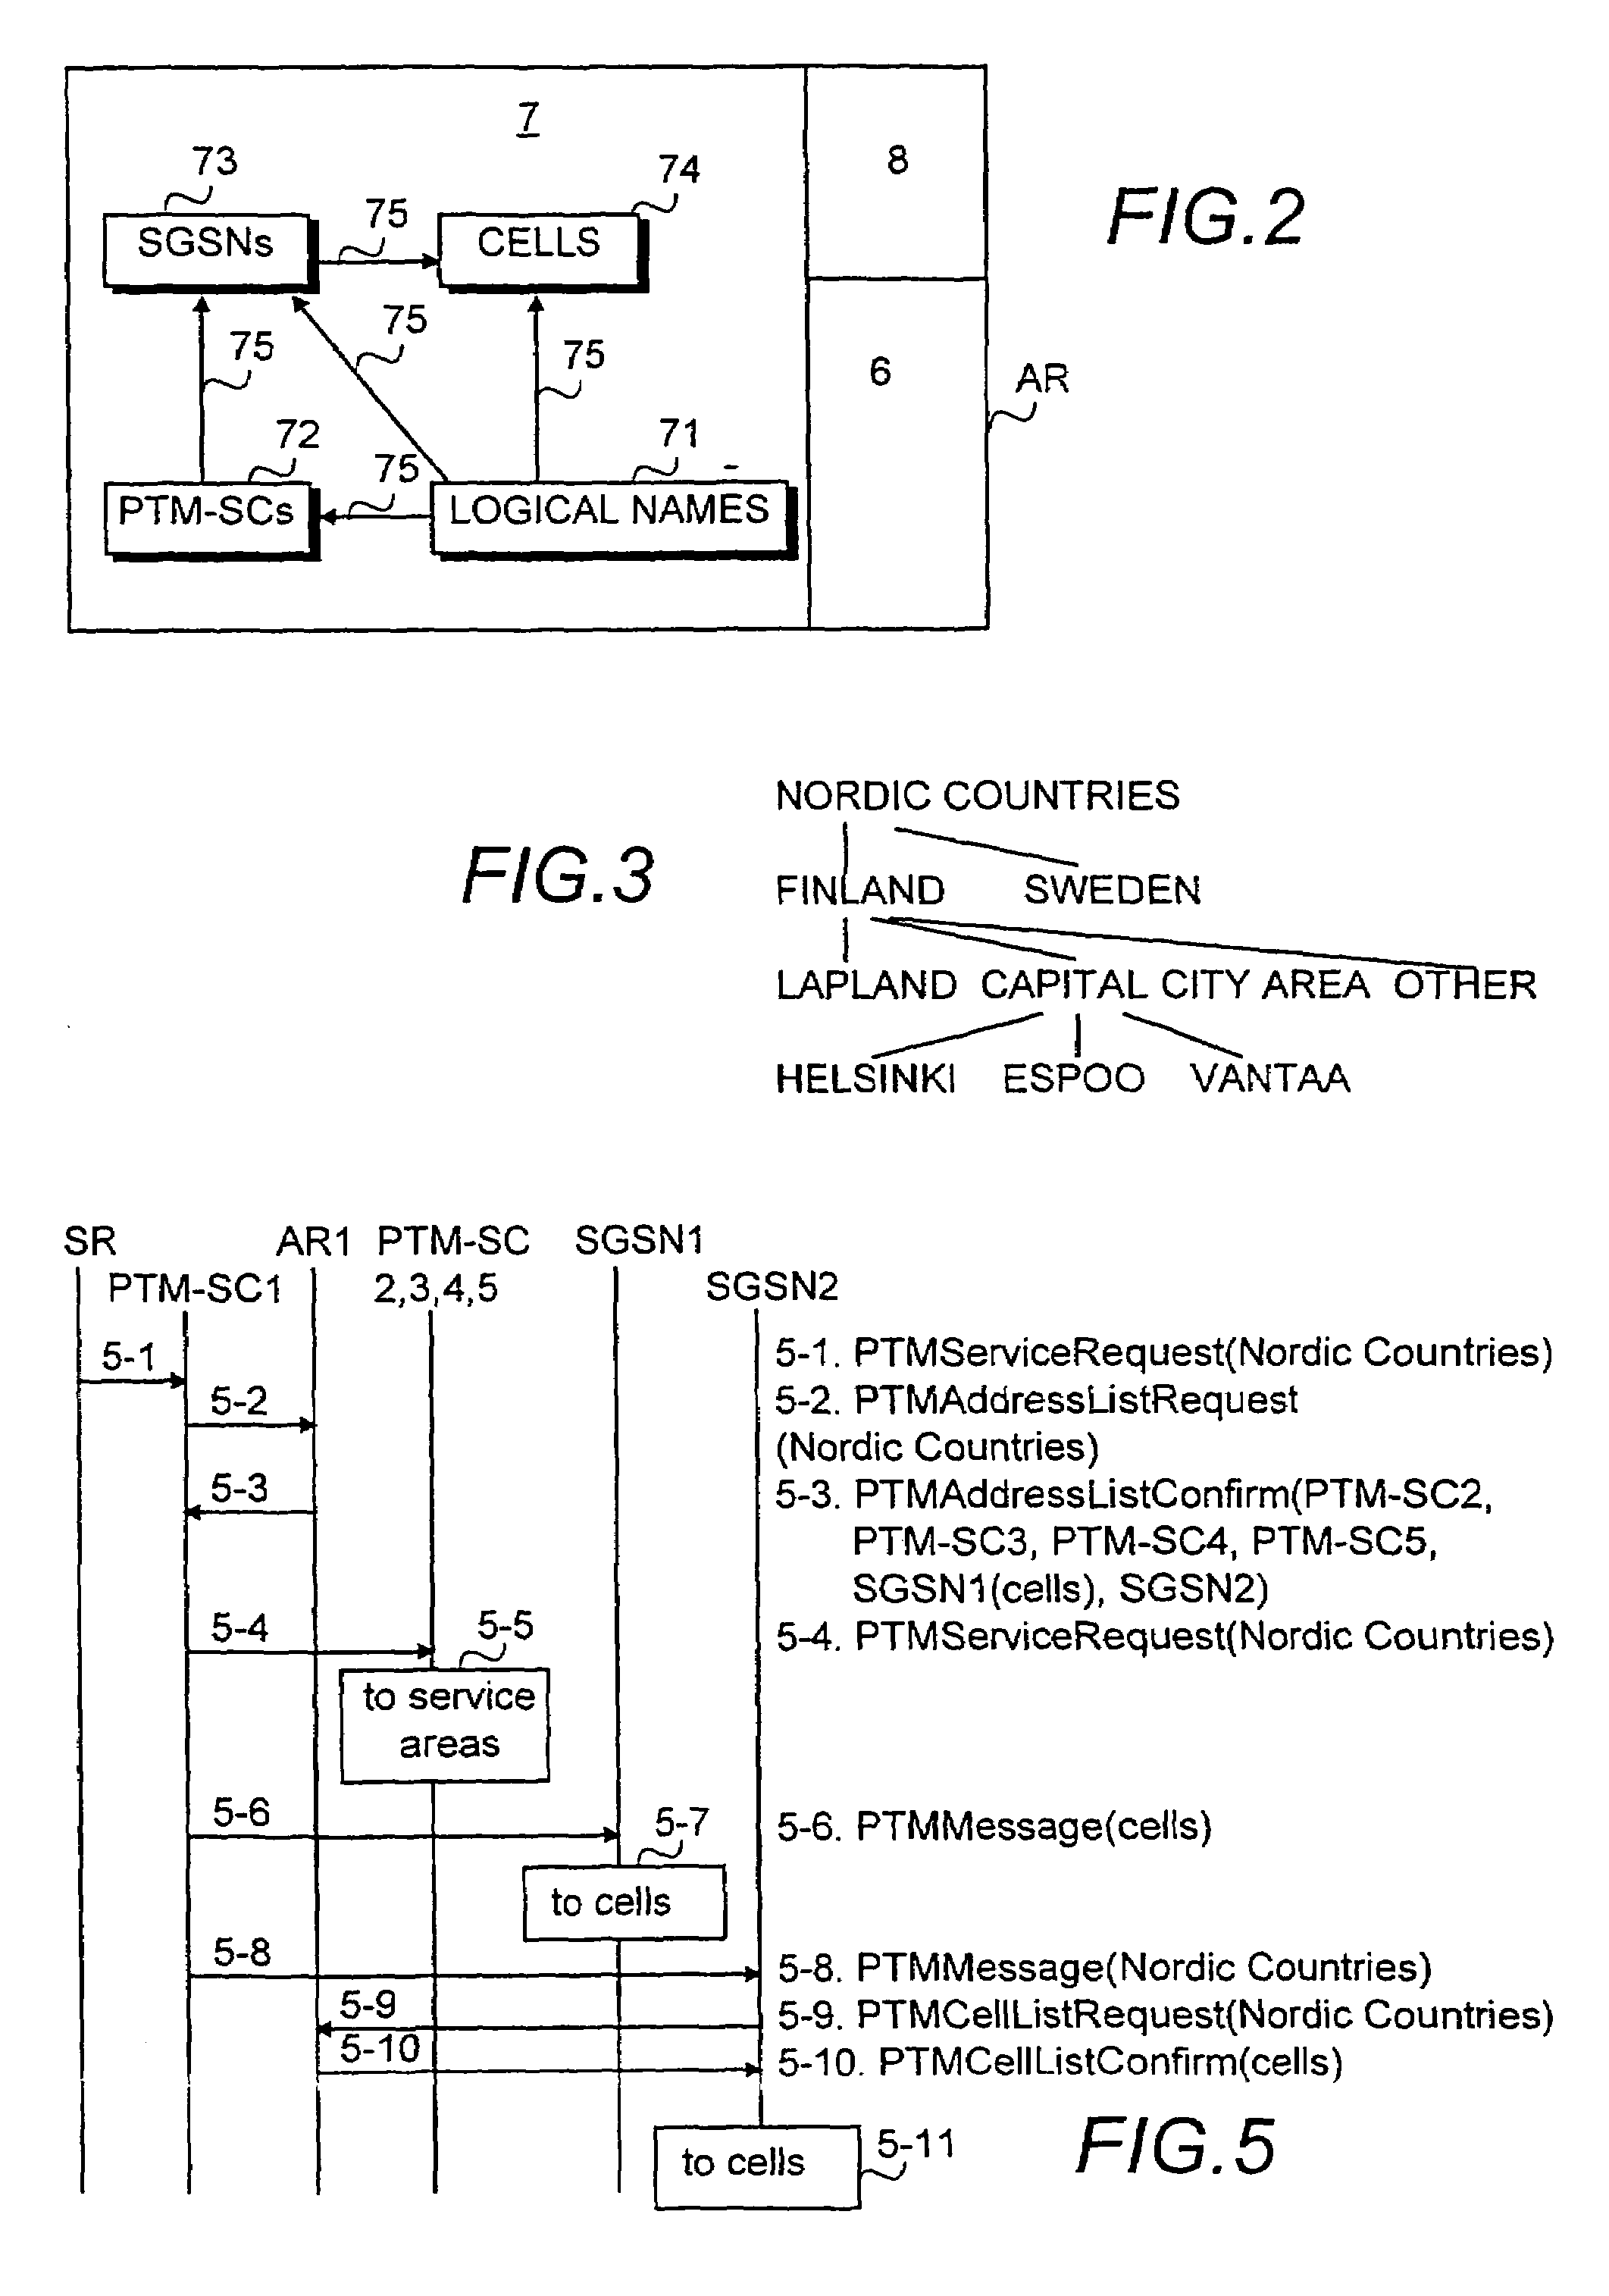 Transmission of point-to-multipoint services to a destination area